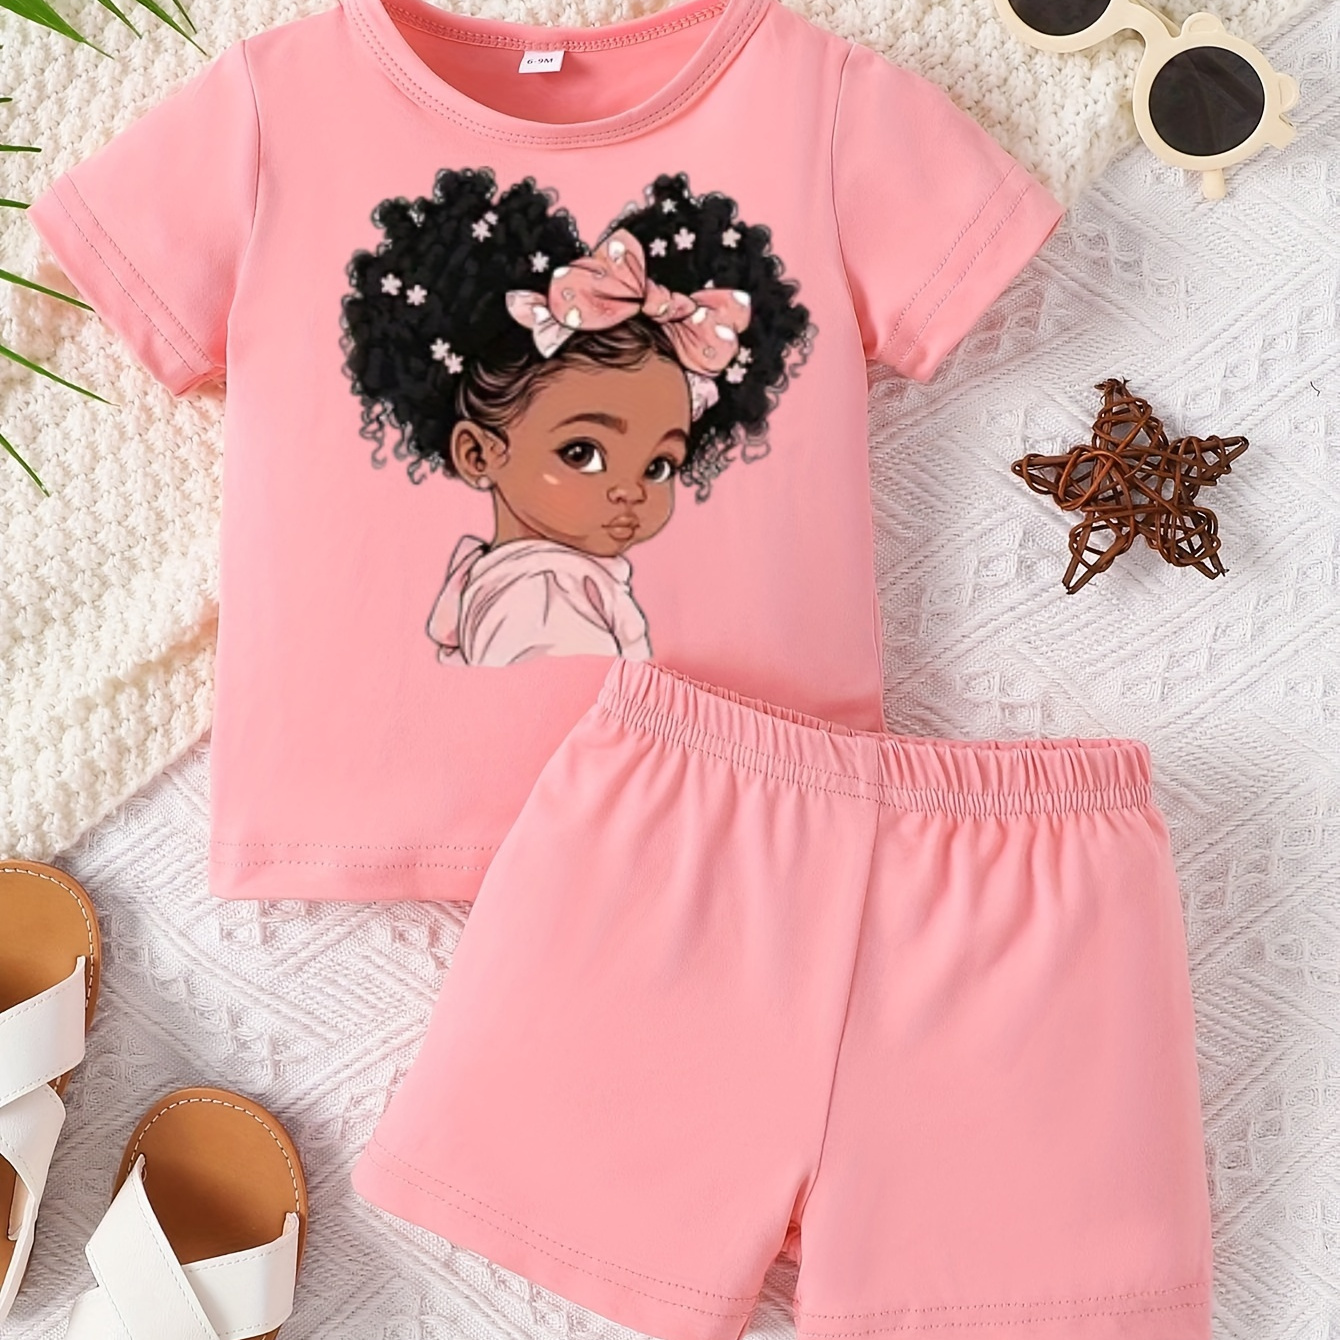 

Baby's Cartoon Bowknot Hairpin Girl Print 2pcs Outfit, T-shirt & Shorts Set, Toddler & Infant Girl's Clothes For Summer